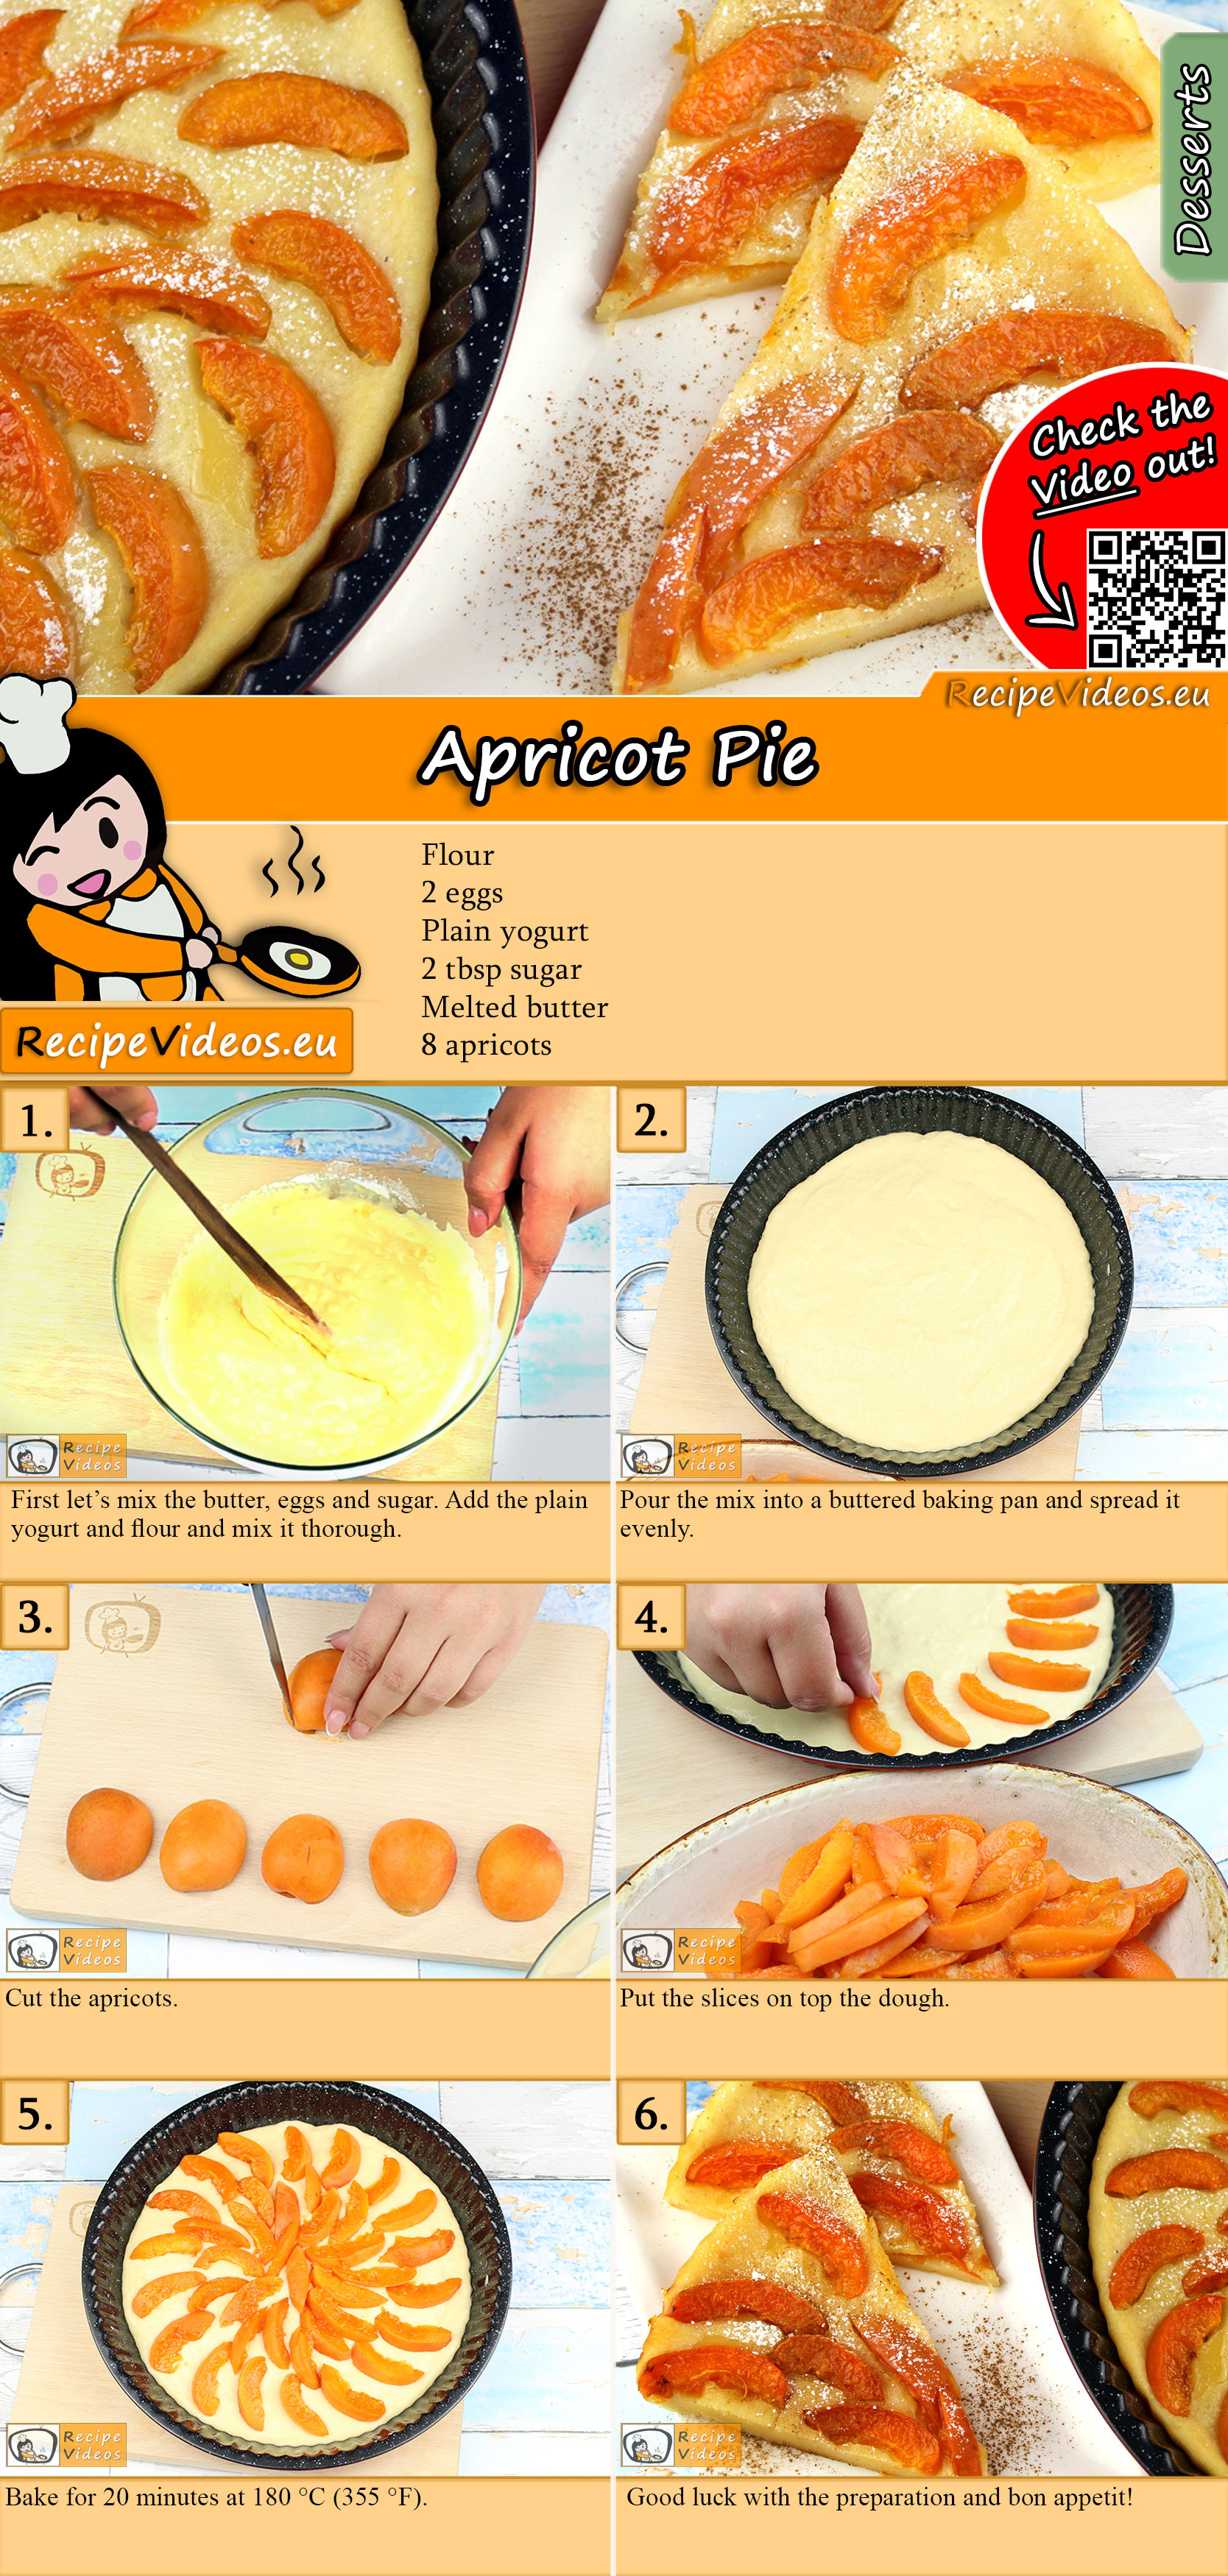 Apricot Pie recipe with video